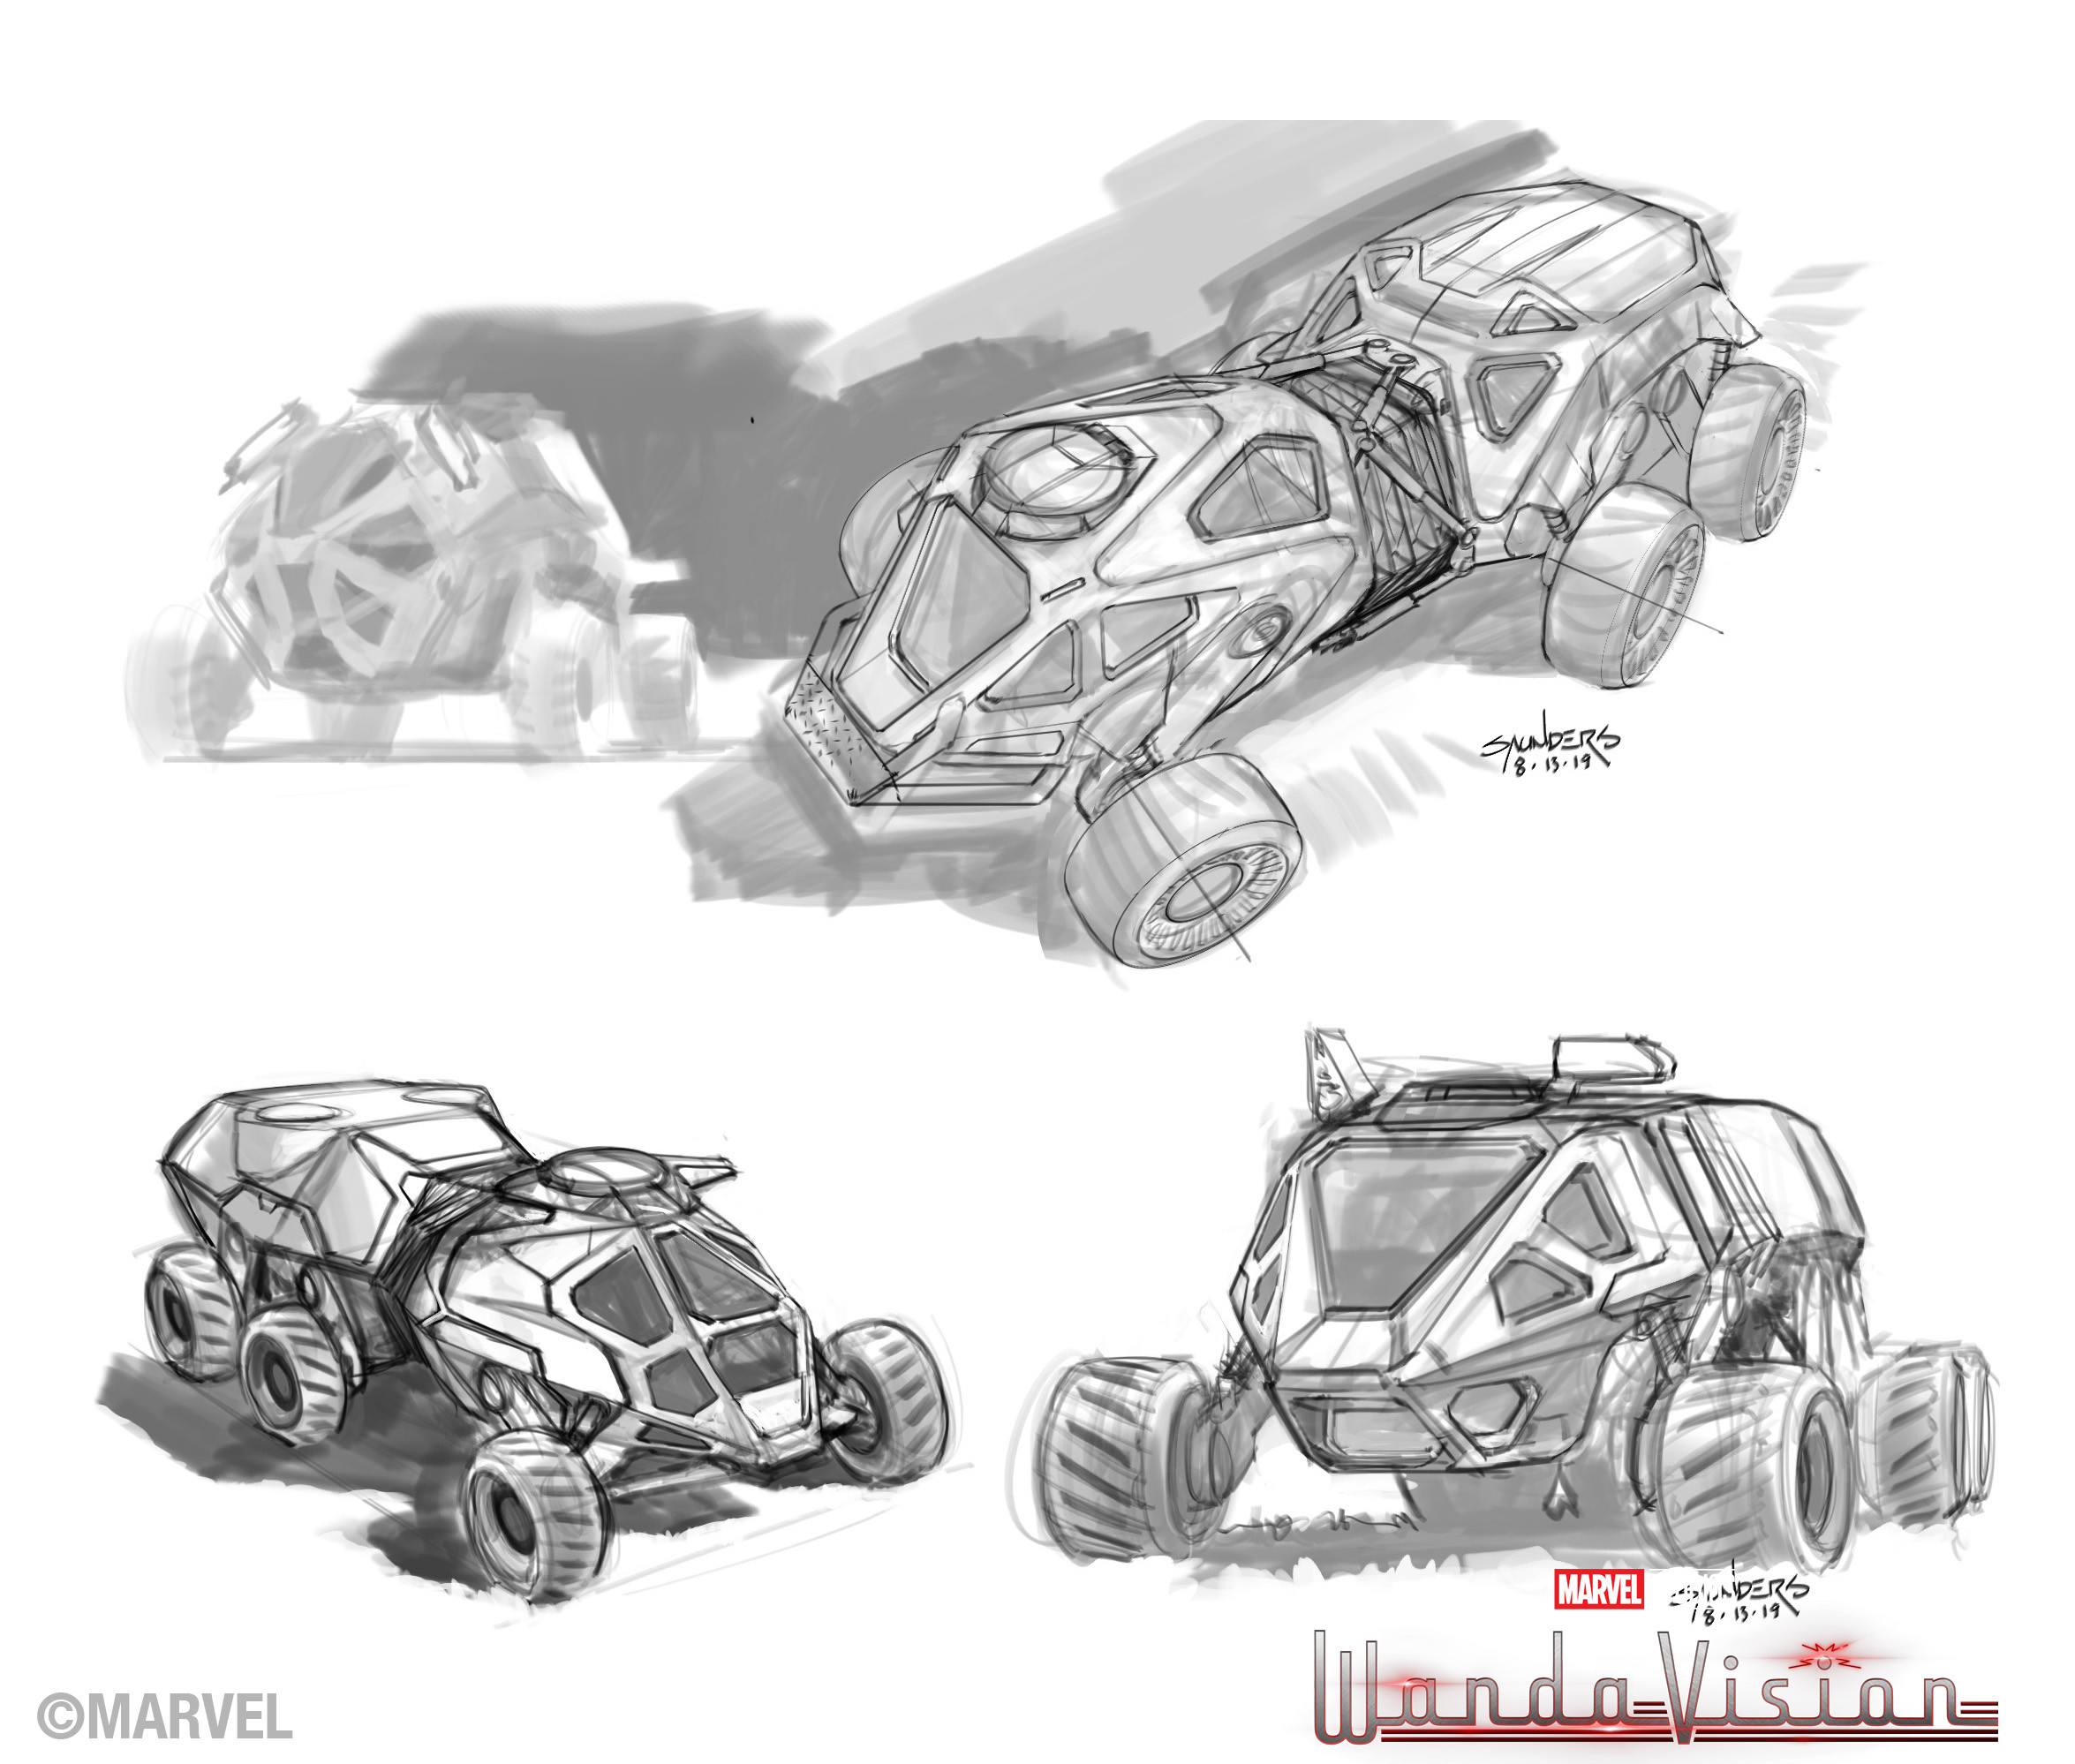 Early sketches to work out a design for the keyframe. The final design from the art department ended up far simpler, without the need for articulation, and was more of a flatbed rather than a mobile lab. 